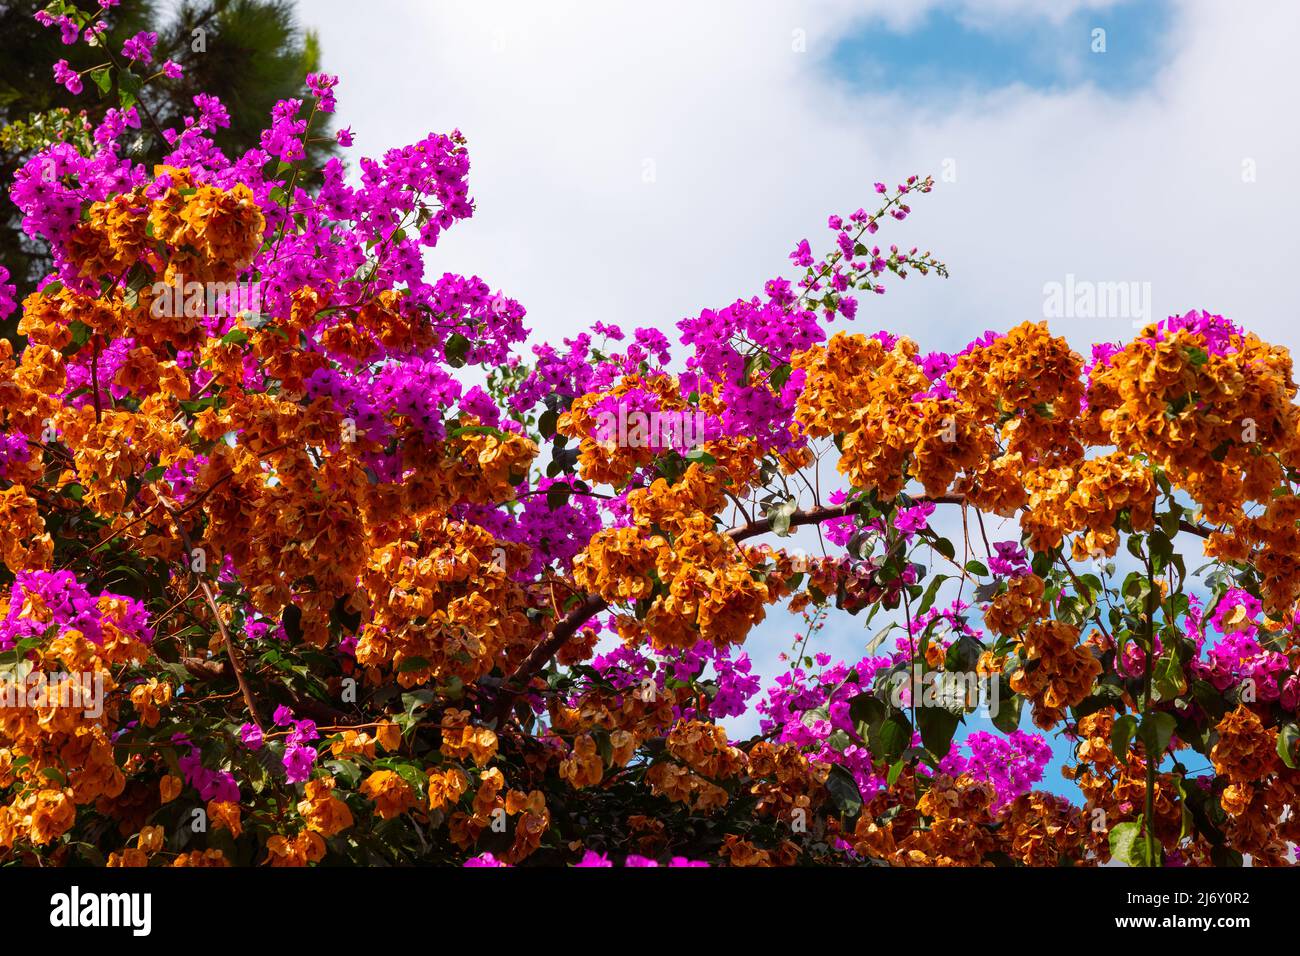 Bougainvillea at autumn. Botany concept in fall season. Pink and brown leaves of Bougainvillea and cloudy sky on the background. Stock Photo